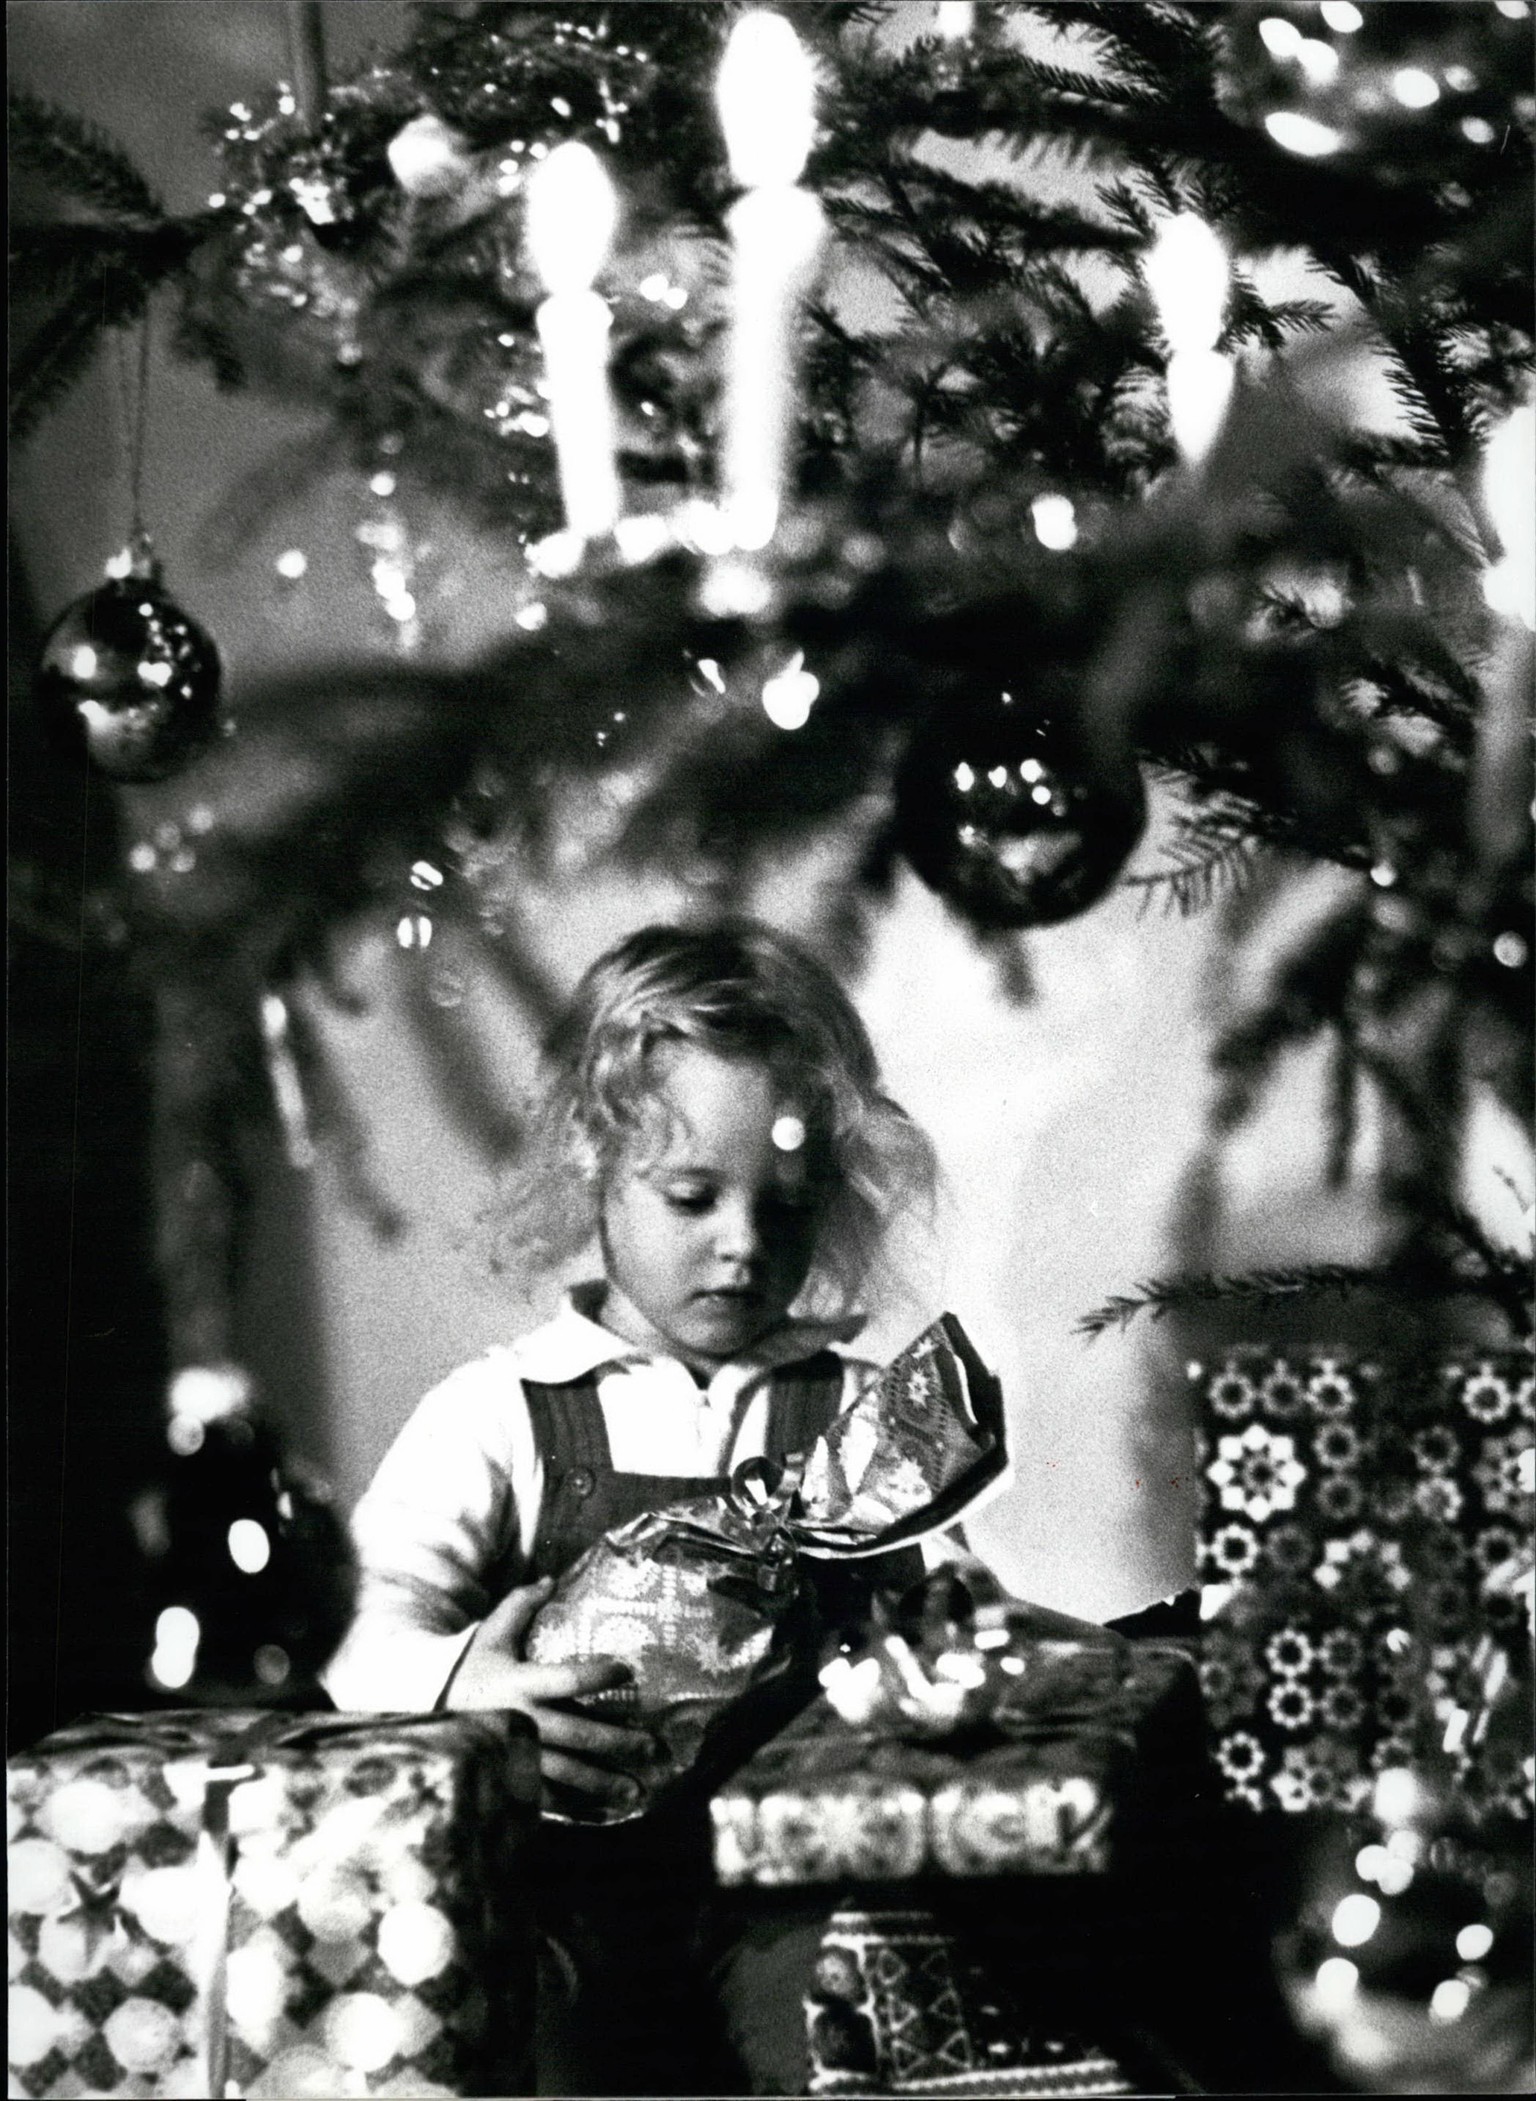 Dec. 12, 1980 - Auspicious Christmas tree Christmas trees have a big fascination mainly for children. It s not the religious symbol they like but the gifts for them they found there. Really a merry Ch ...